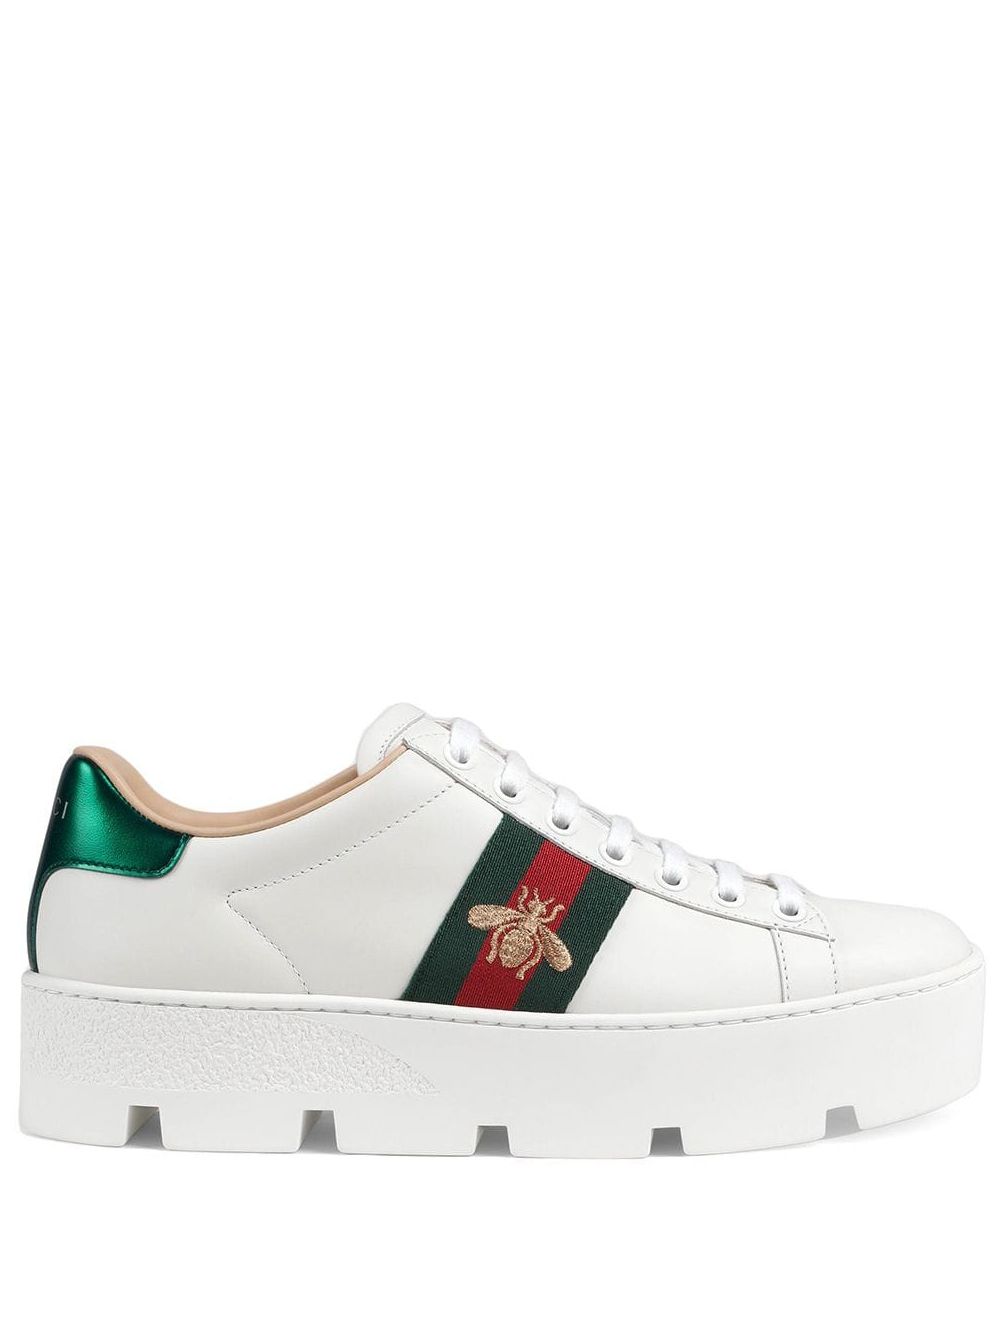 Image 1 of Gucci Ace embroidered platform sneaker